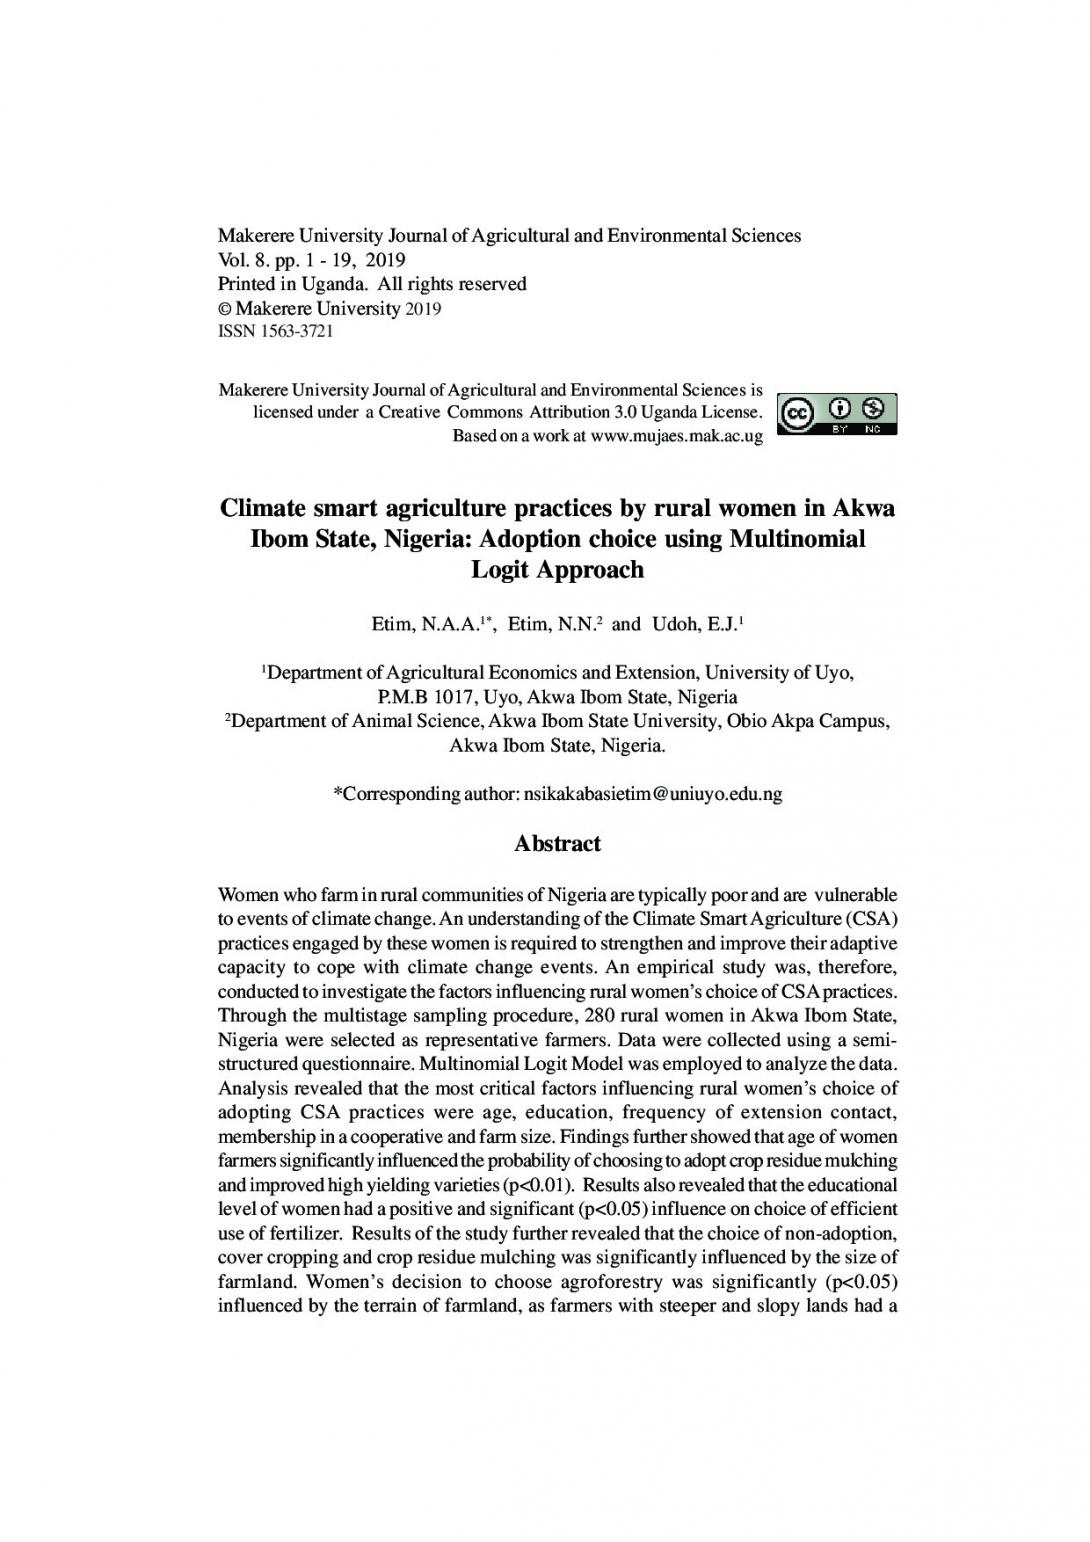 Climate smart agriculture practices by rural women in Akwa Ibom State, Nigeria: Adoption choice using Multinomial Logit Approach.